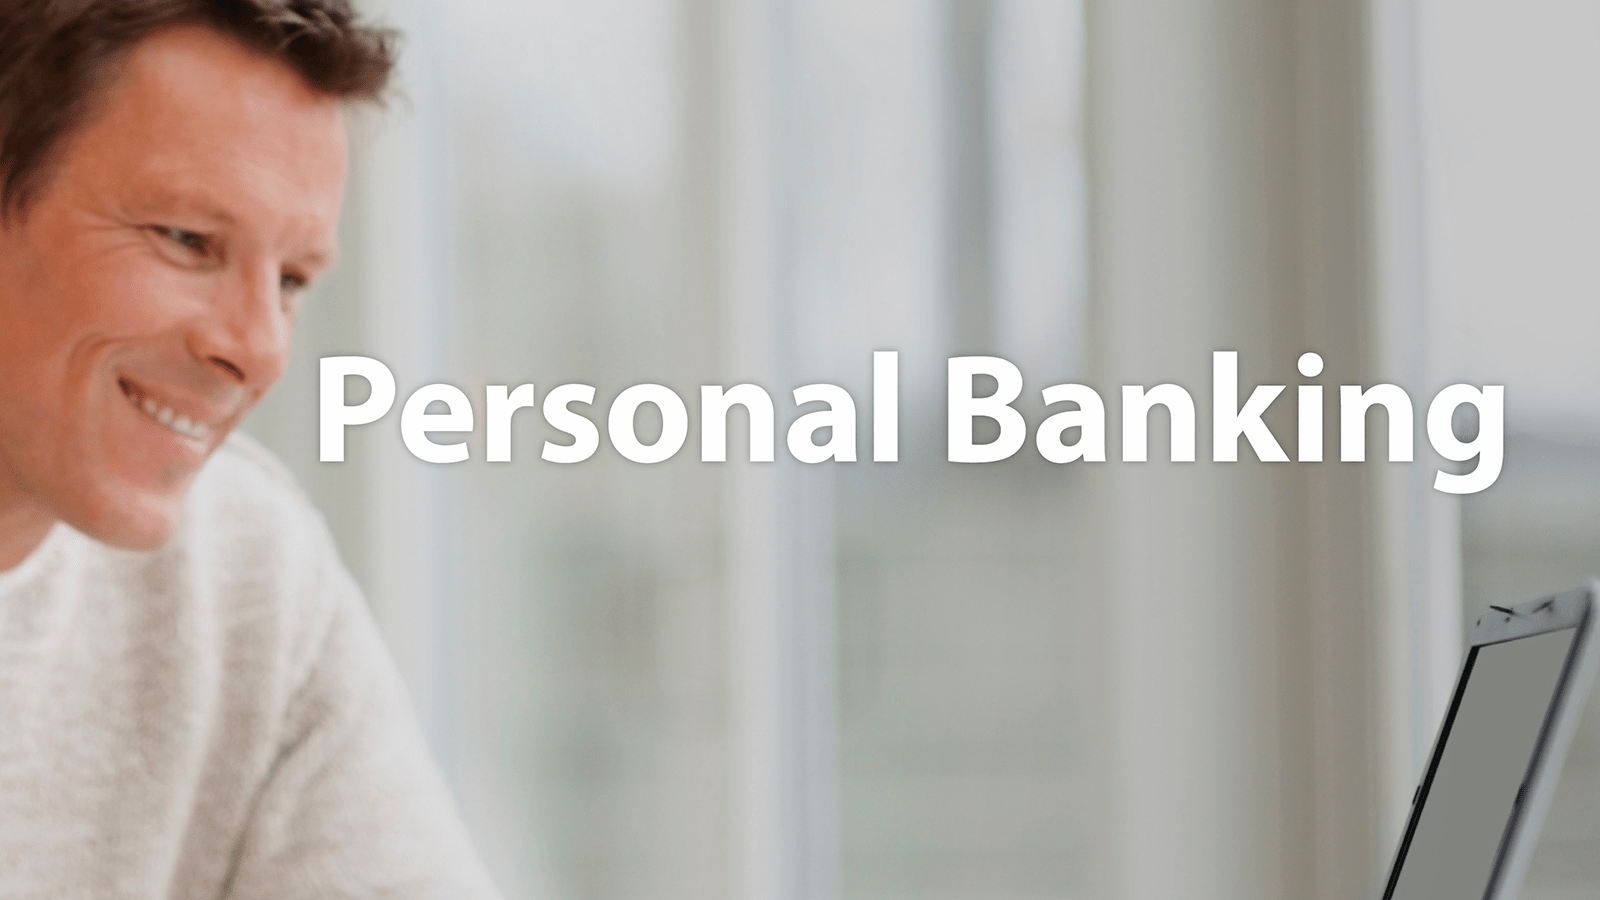 Personal Banking Malta: How to Choose the Right Bank